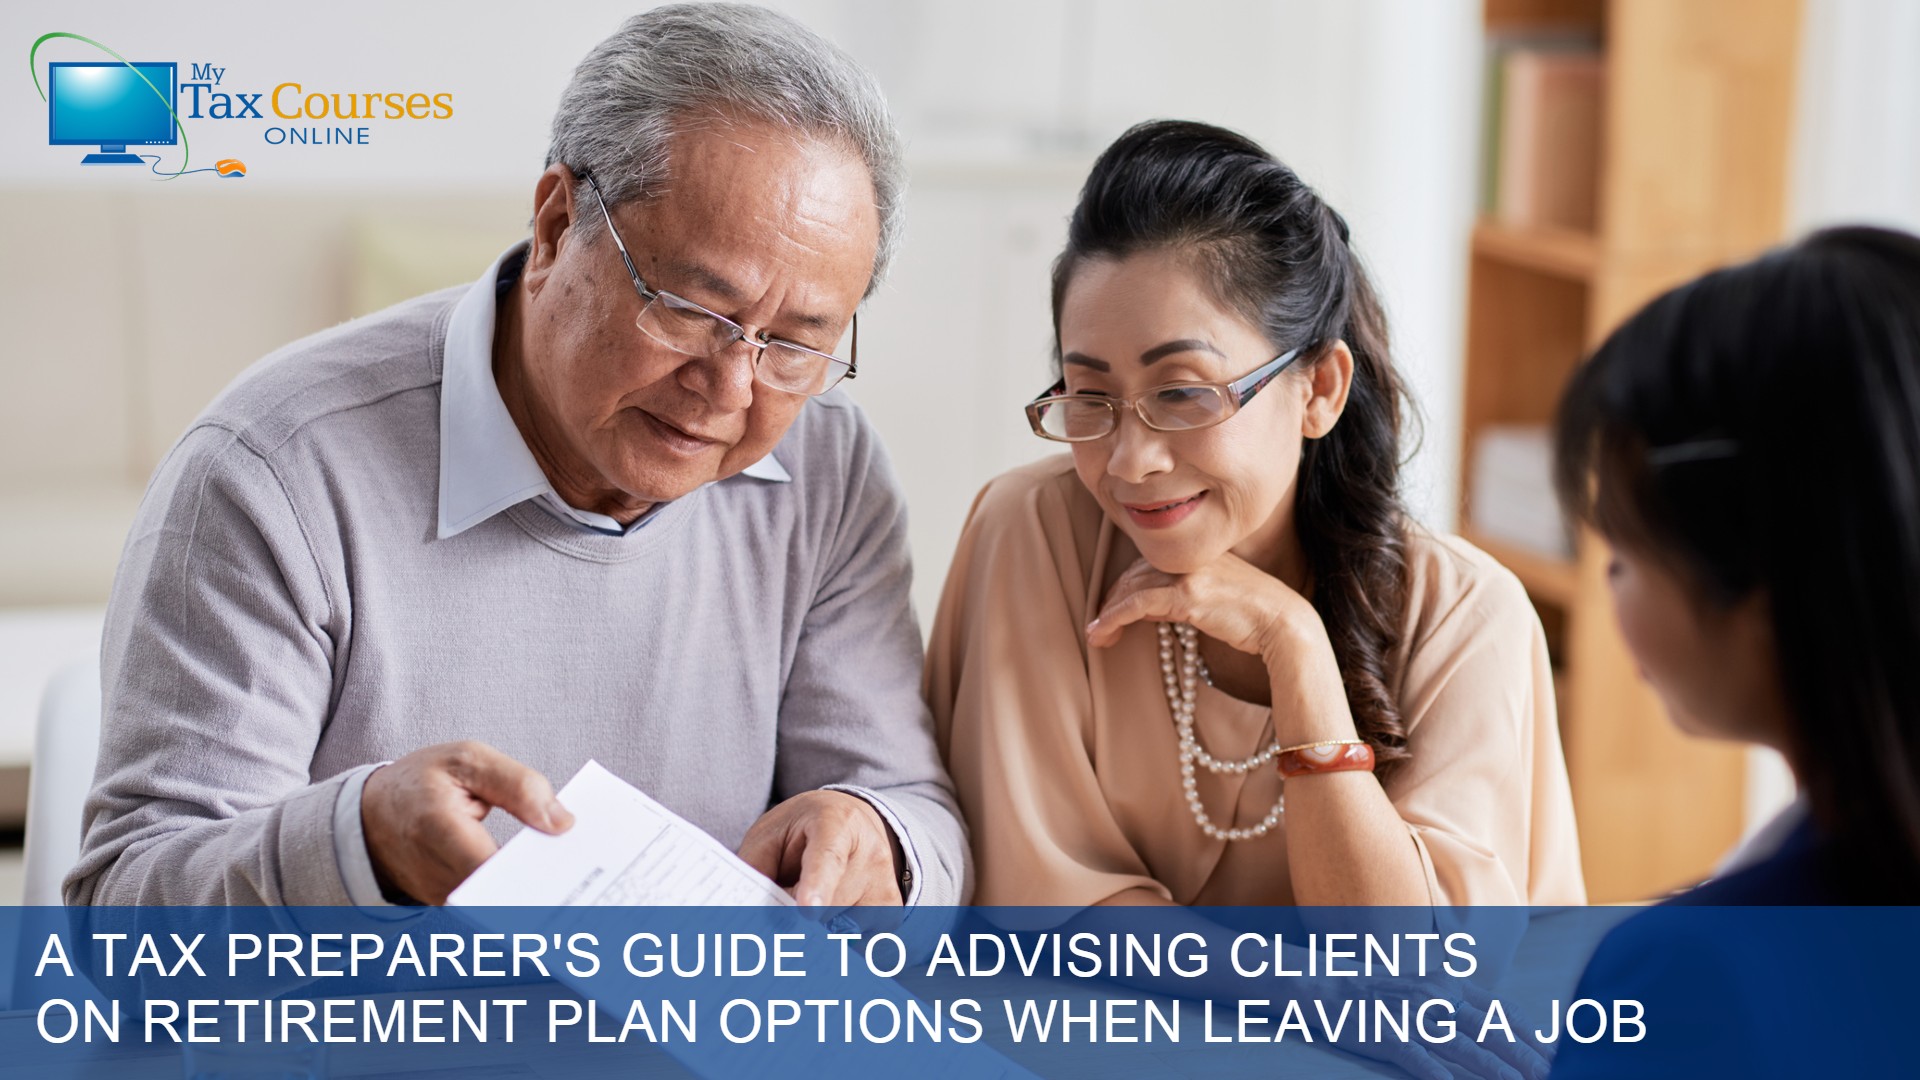 Advising Clients on Retirement Plan Options When They Leave a Job